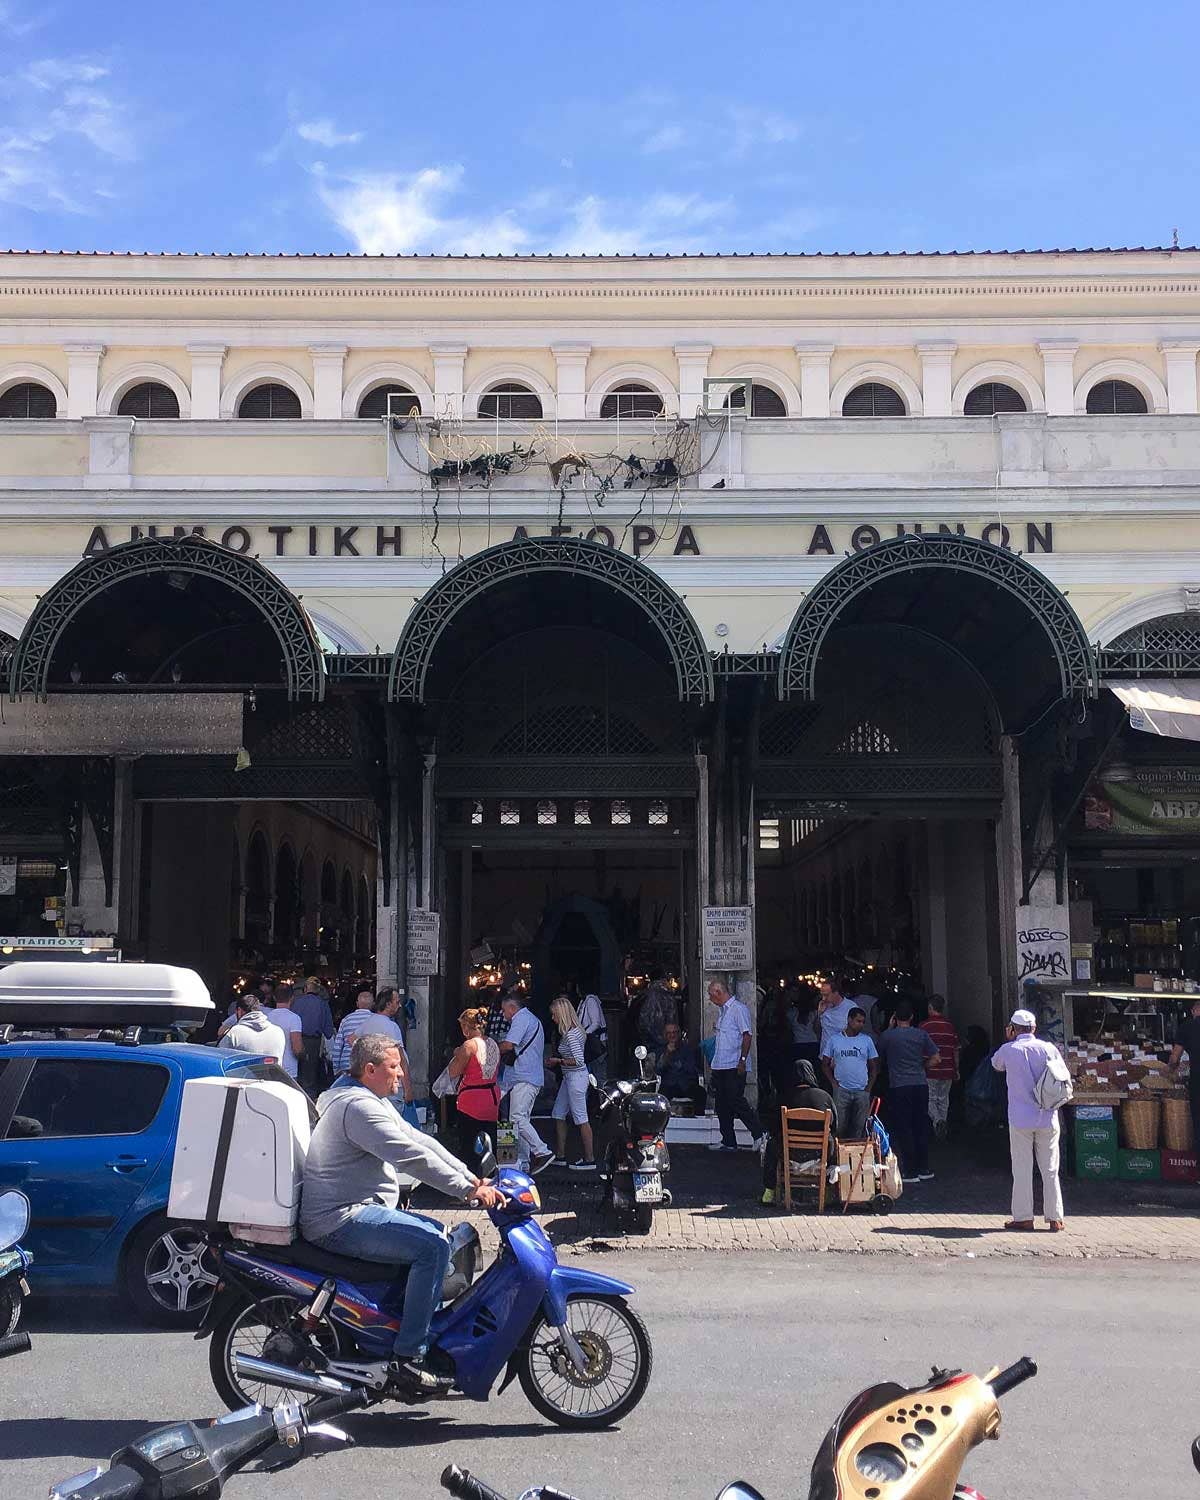 If You Want to Understand Greek Food, You Have to Visit Athens’ Central Market